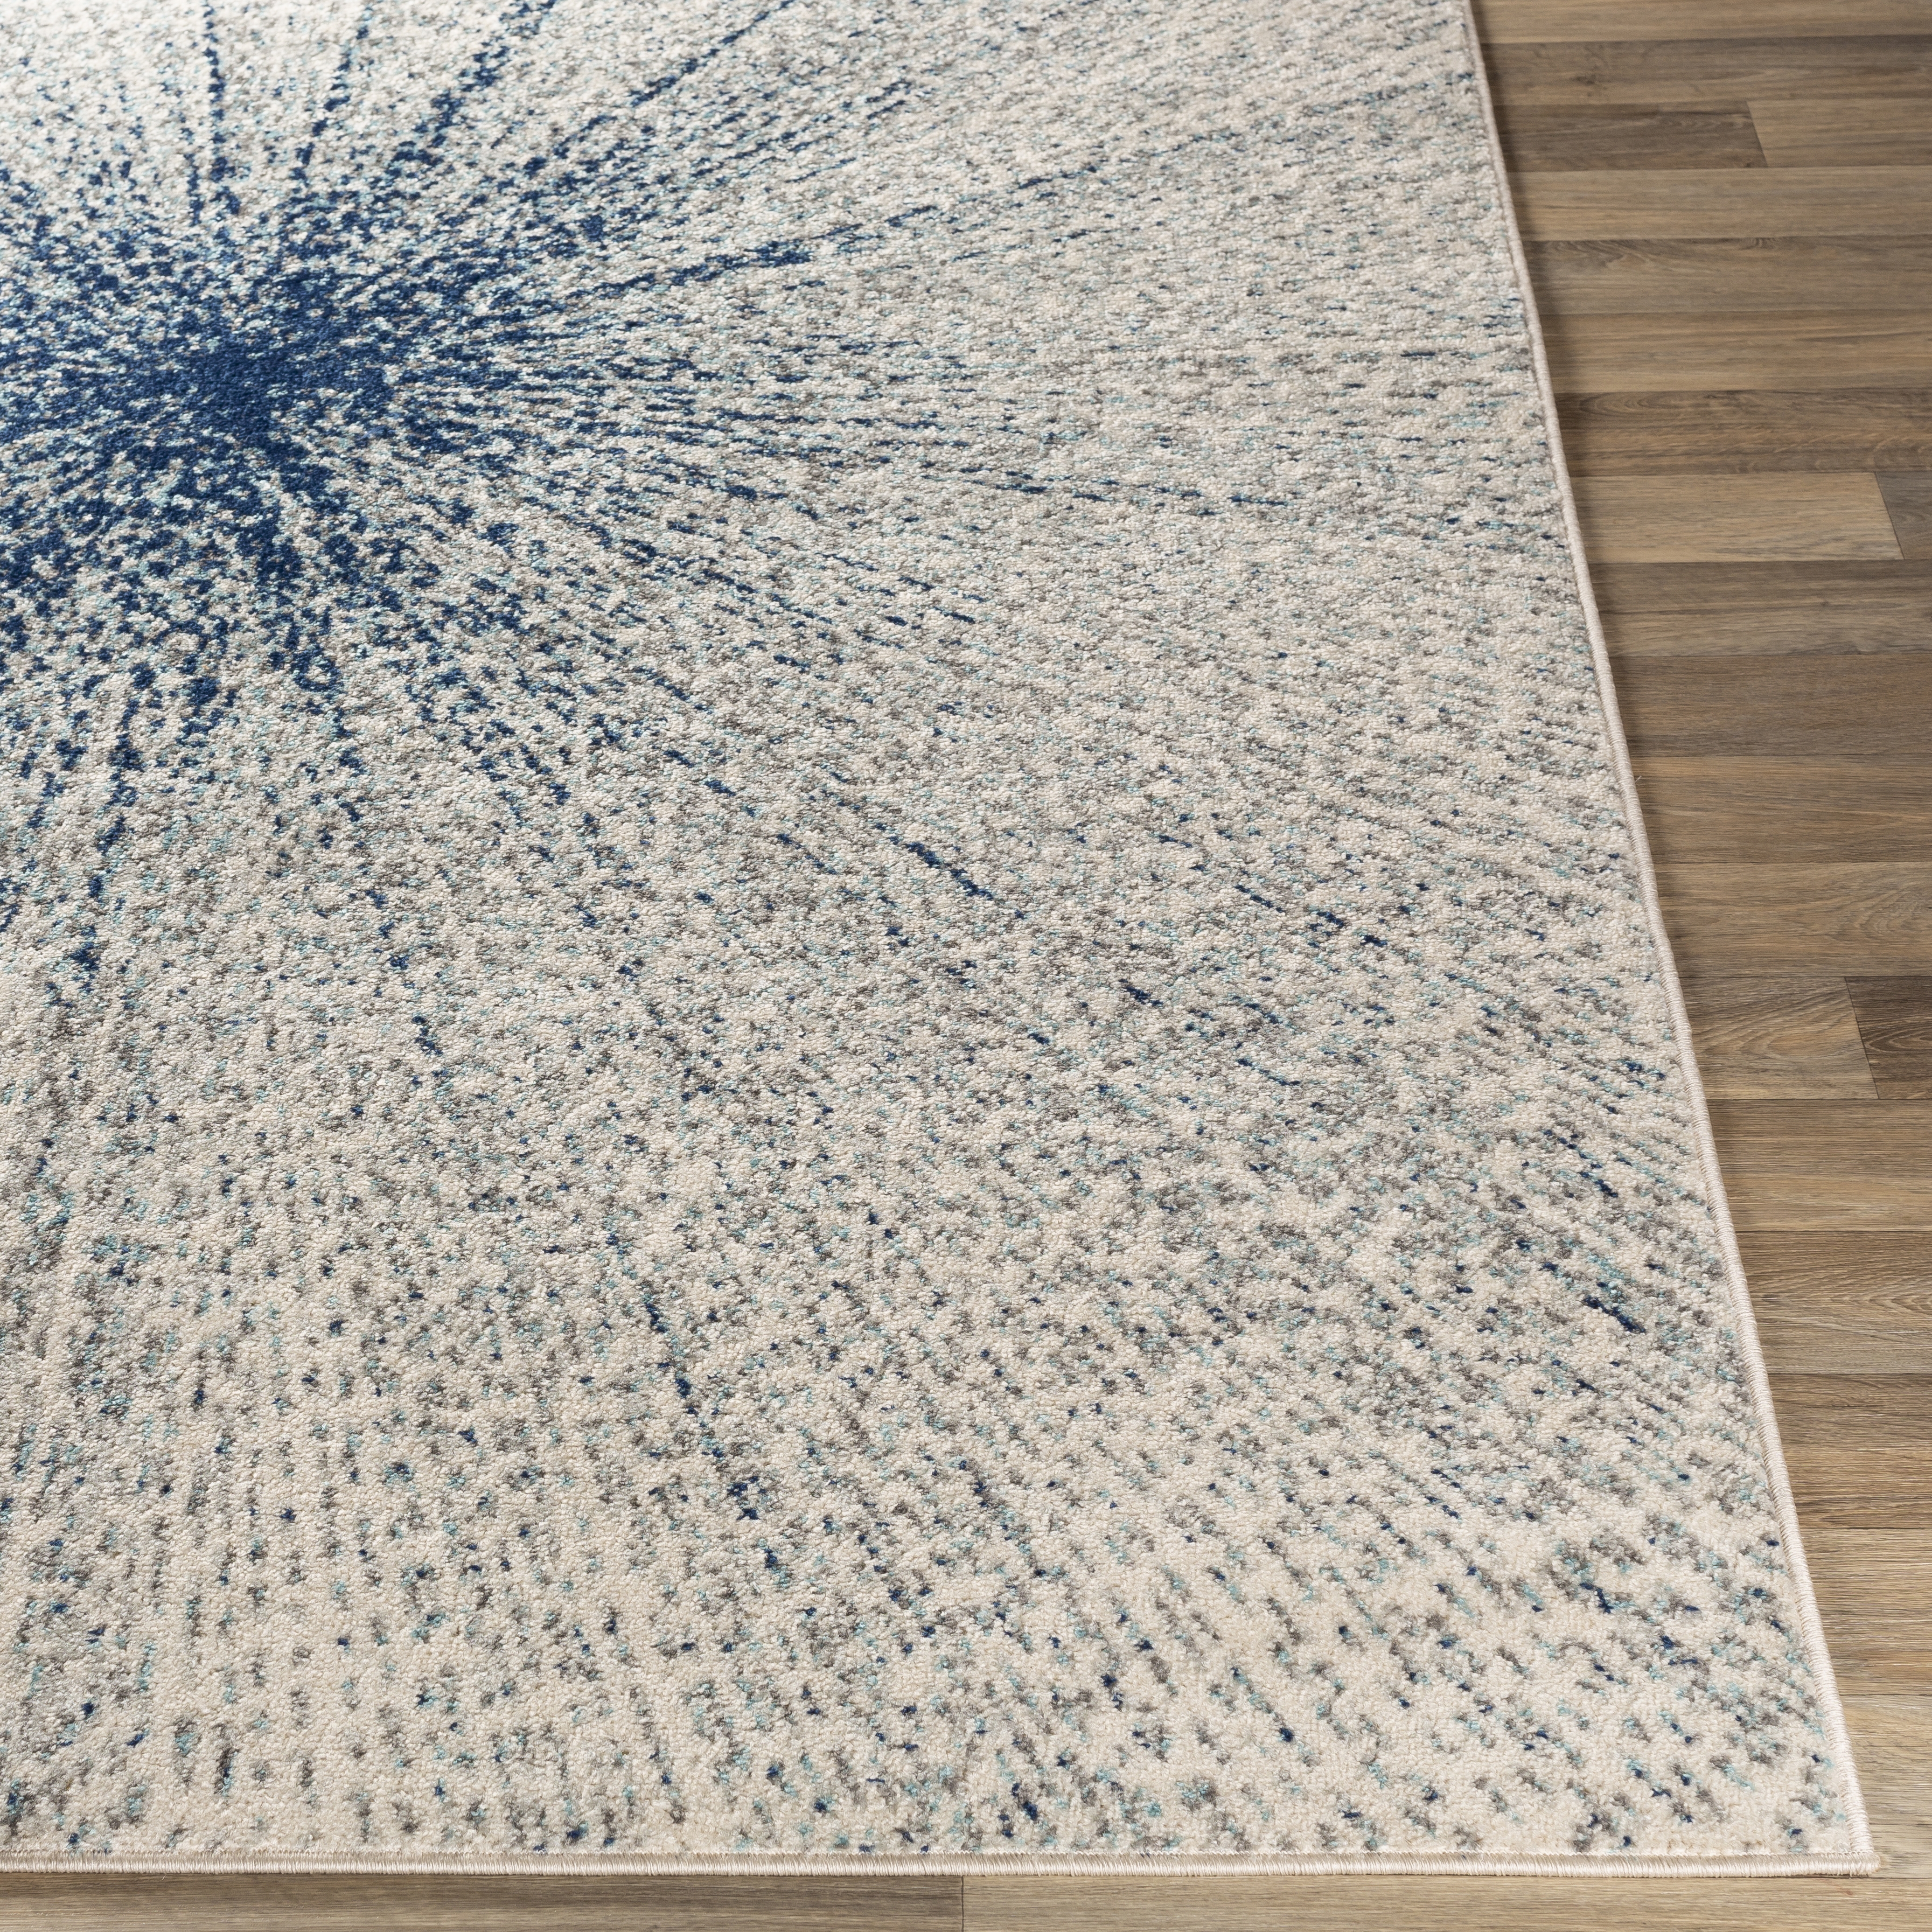 Chester Rug, 7'10" x 10'3" - Image 2